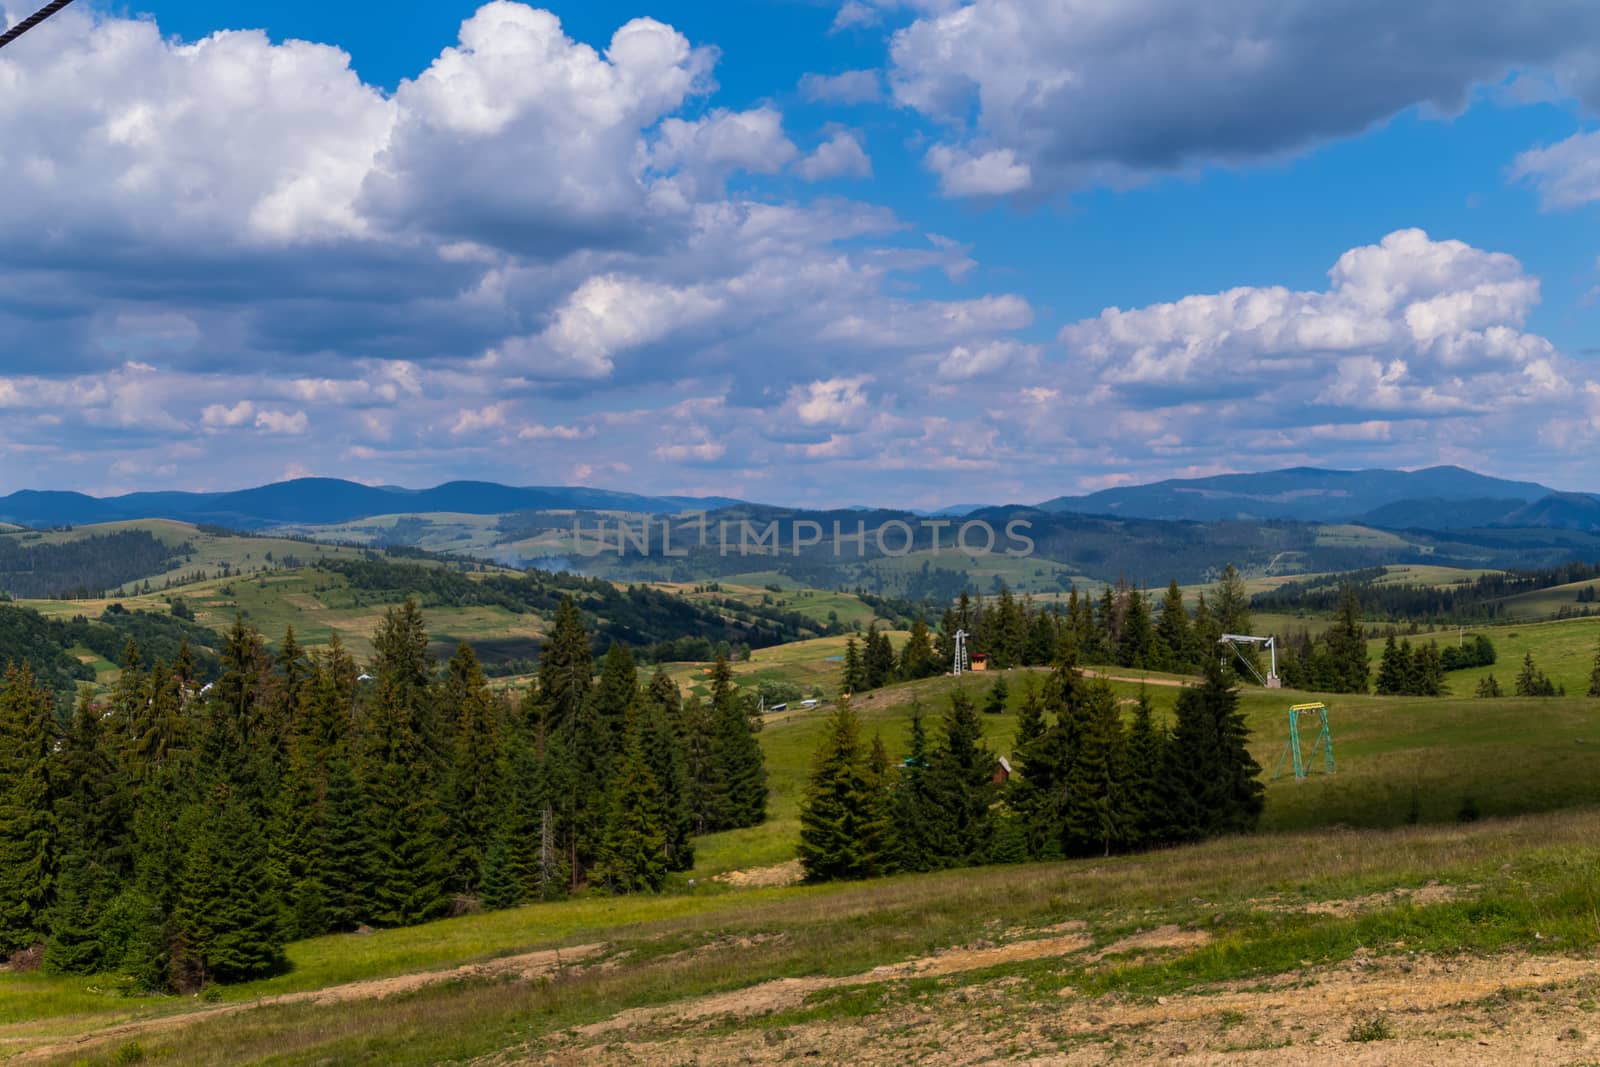 mountain landscape, green slopes, and, ski lifts against a cloudy blue sky by Adamchuk